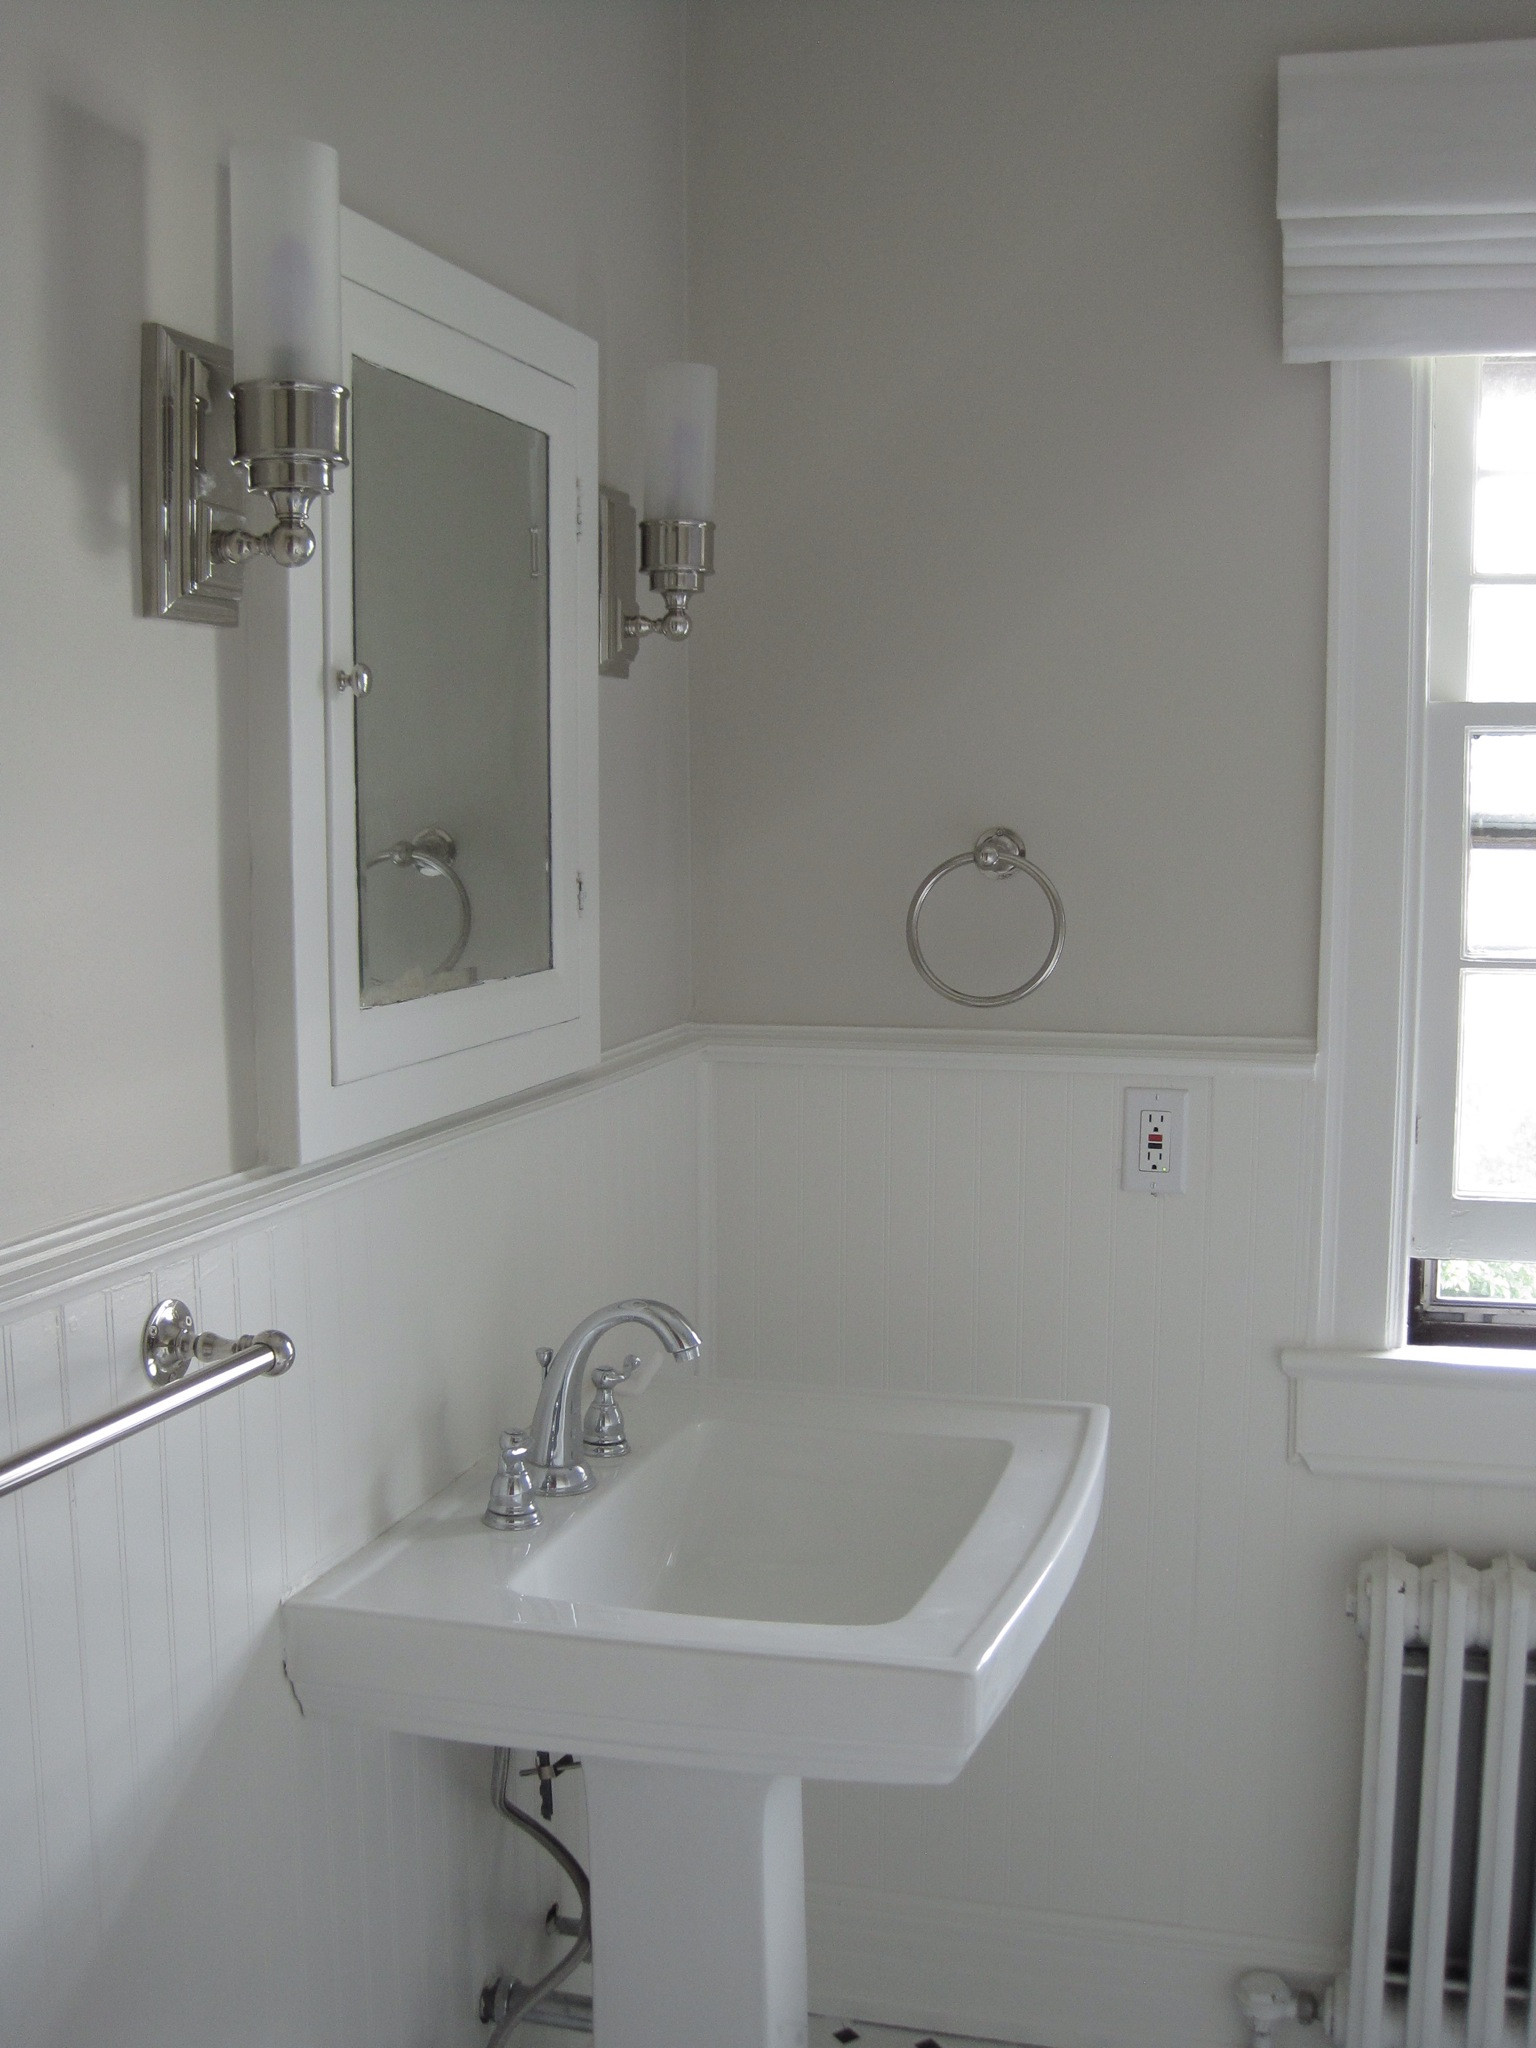 Benjamin Moore Bathroom Paint Colors
 Guest bathroom paint and more progress – The Writer and